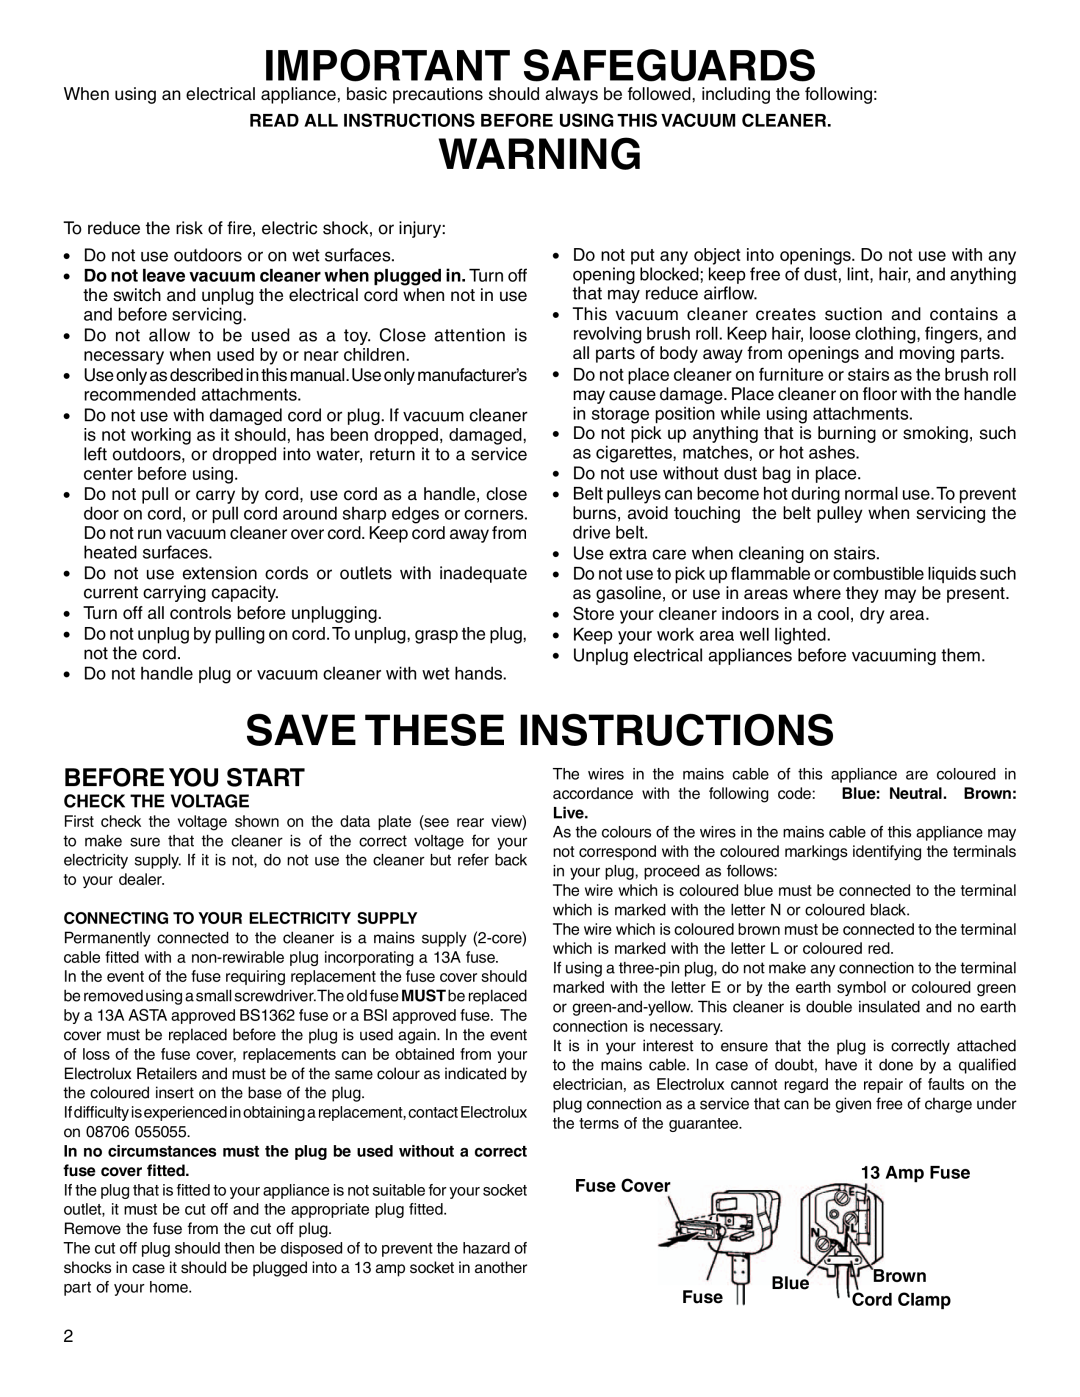 Electrolux Z2900 Series manual Important Safeguards, Save These Instructions, Before You Start 